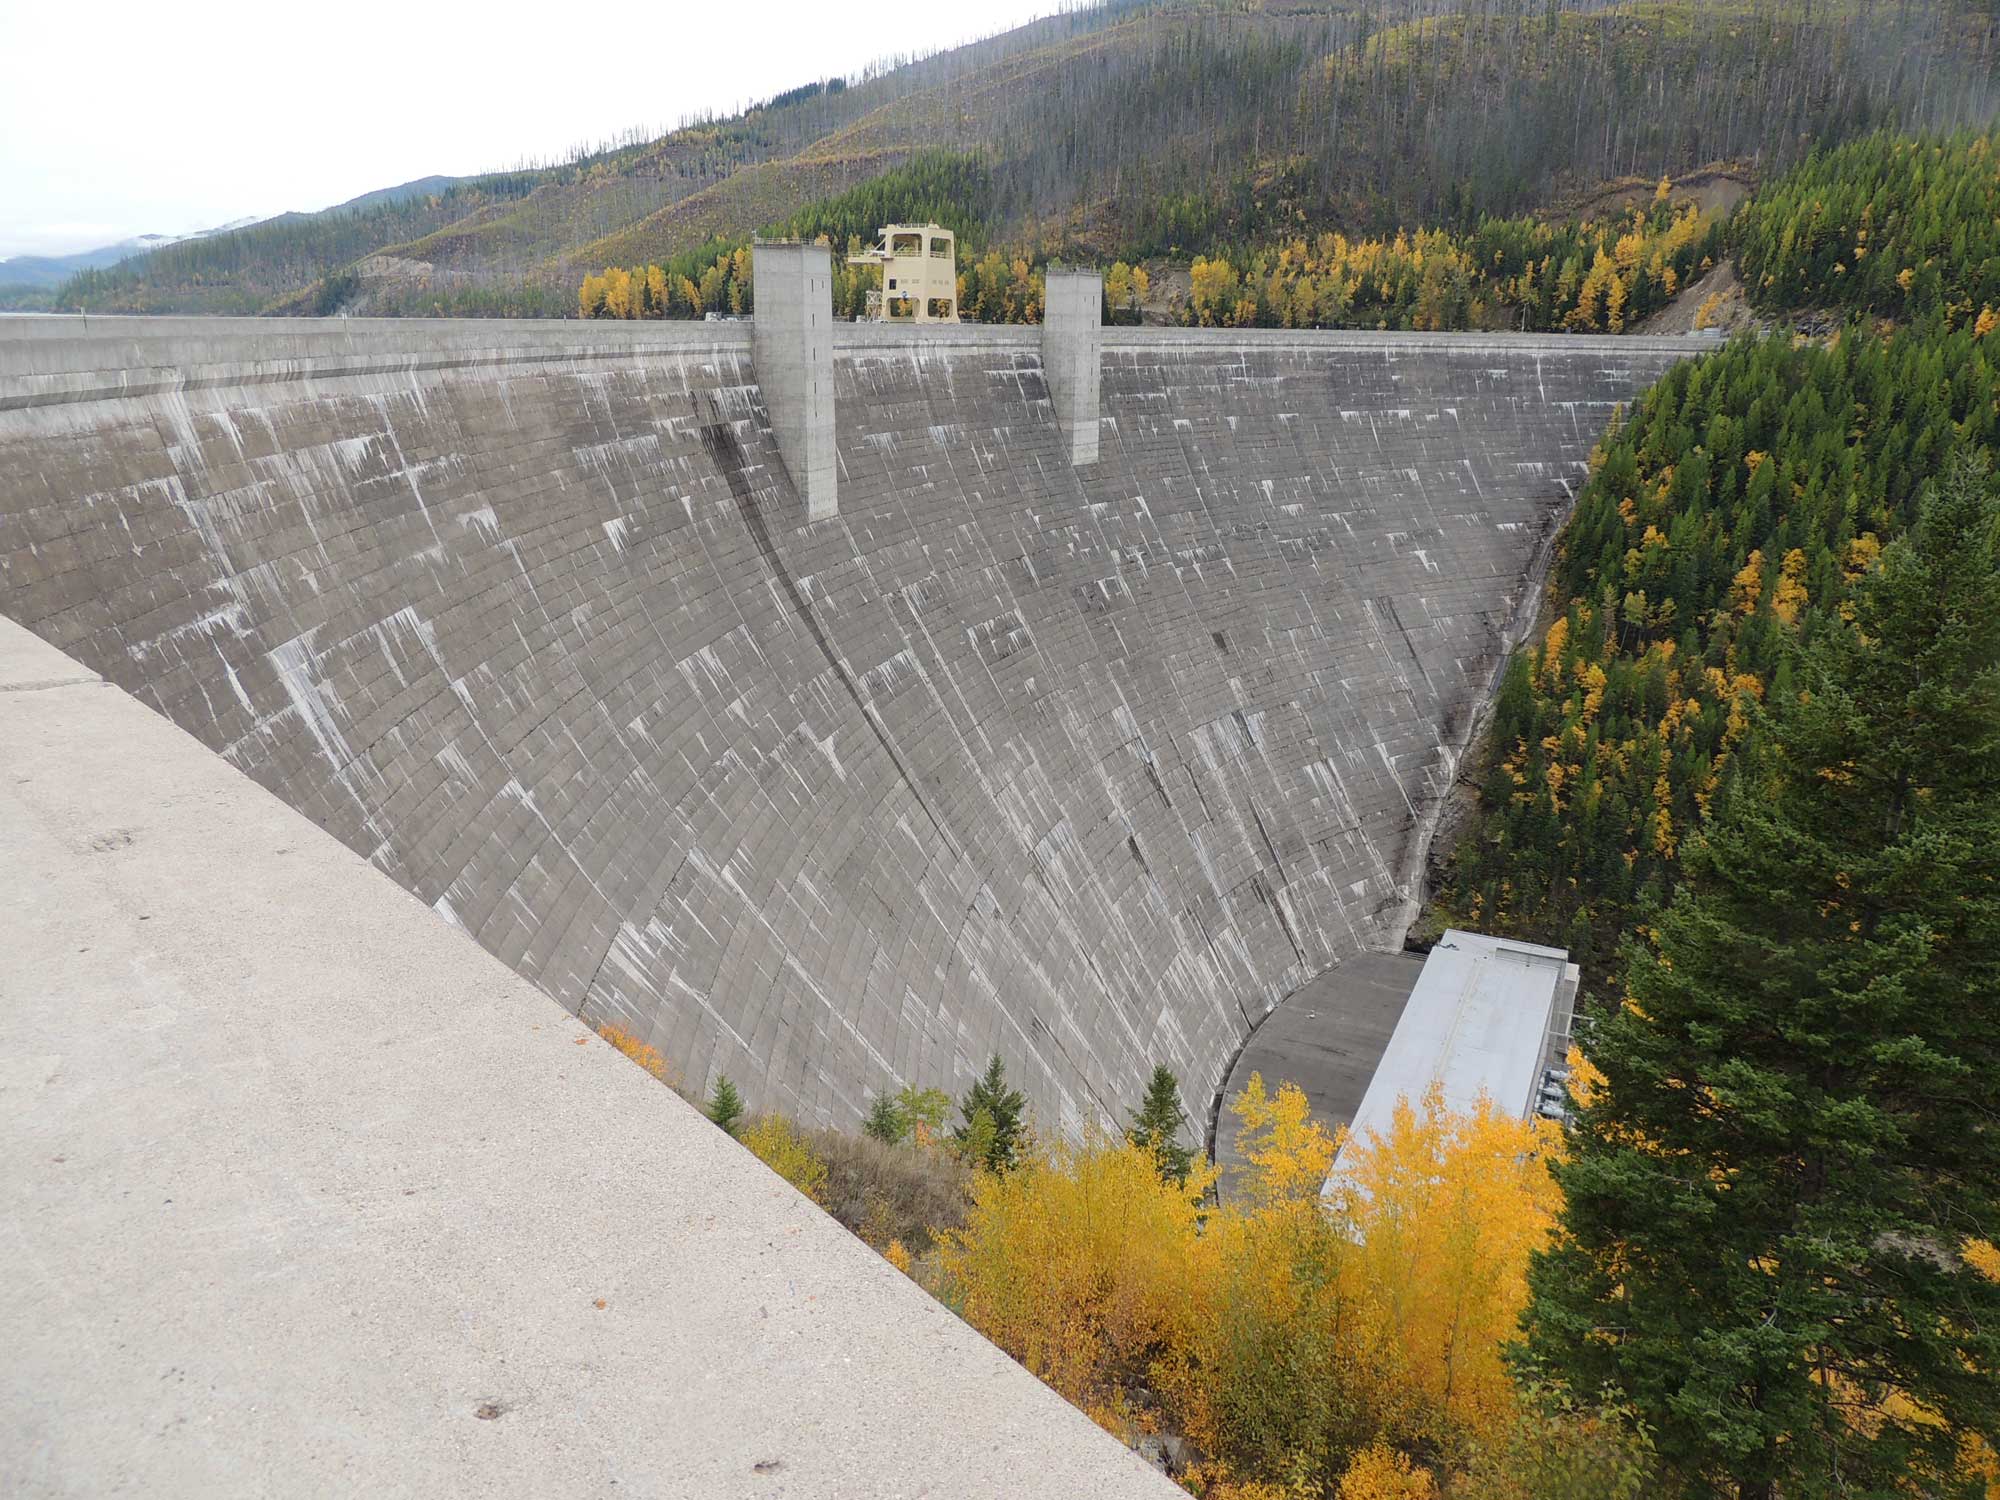 Photograph of Hungry Horse Dam on the Flathead River in Montana. The photo shows a tall concrete dam. The photo is taken from one side of the dam looking across to the opposite shore. Conifer-covered slopes rise in the distance, presumably next to a reservoir.